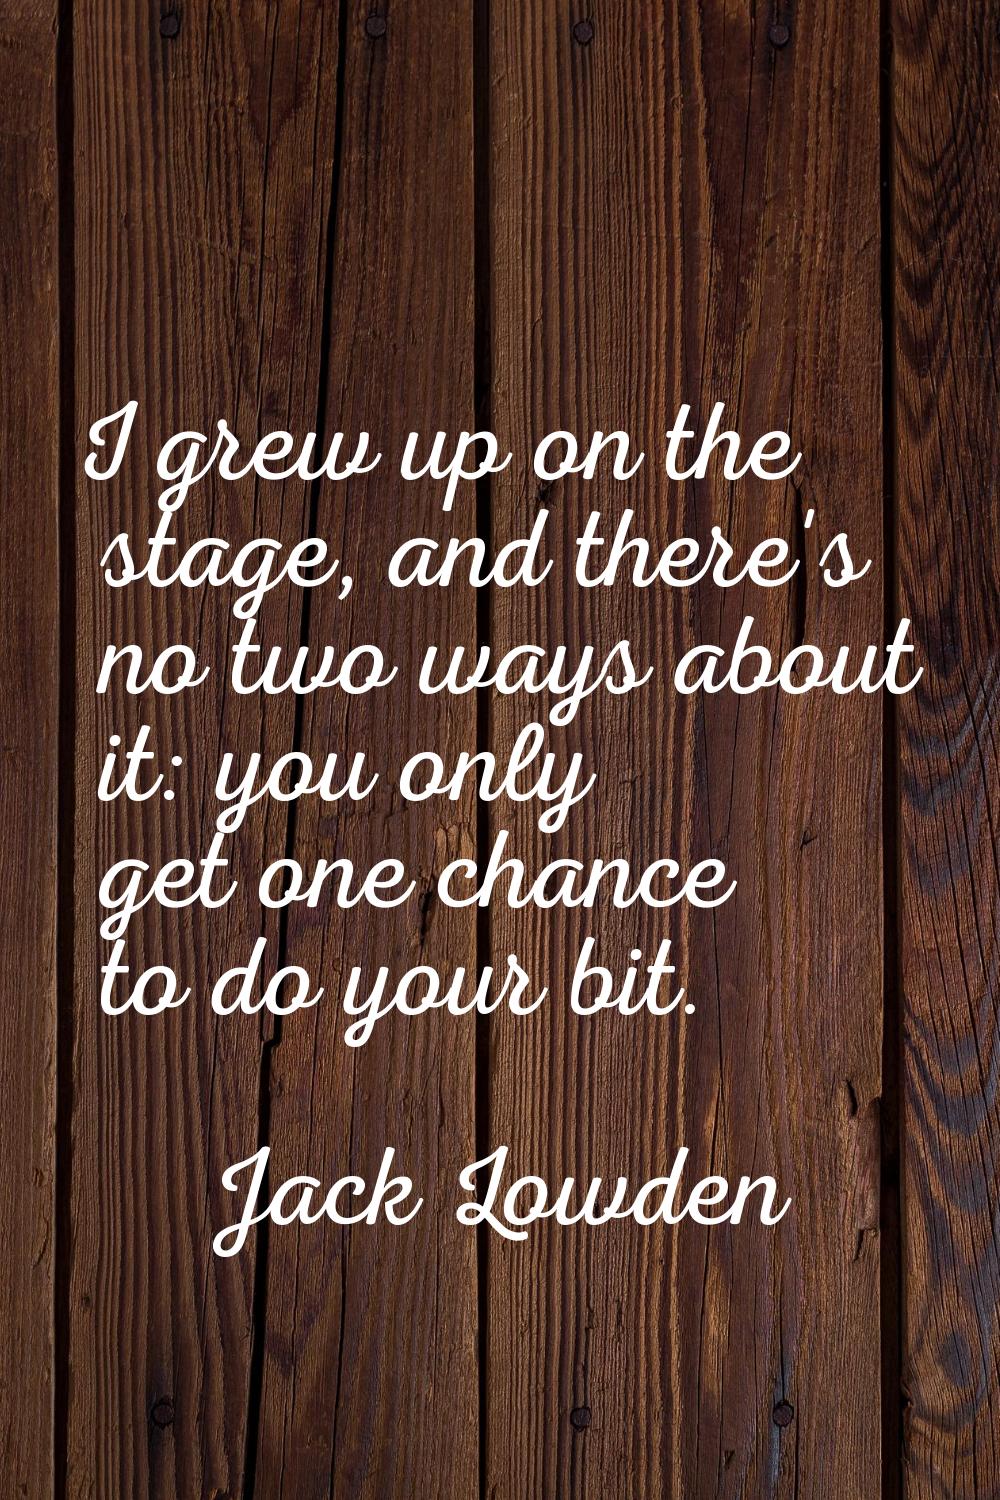 I grew up on the stage, and there's no two ways about it: you only get one chance to do your bit.